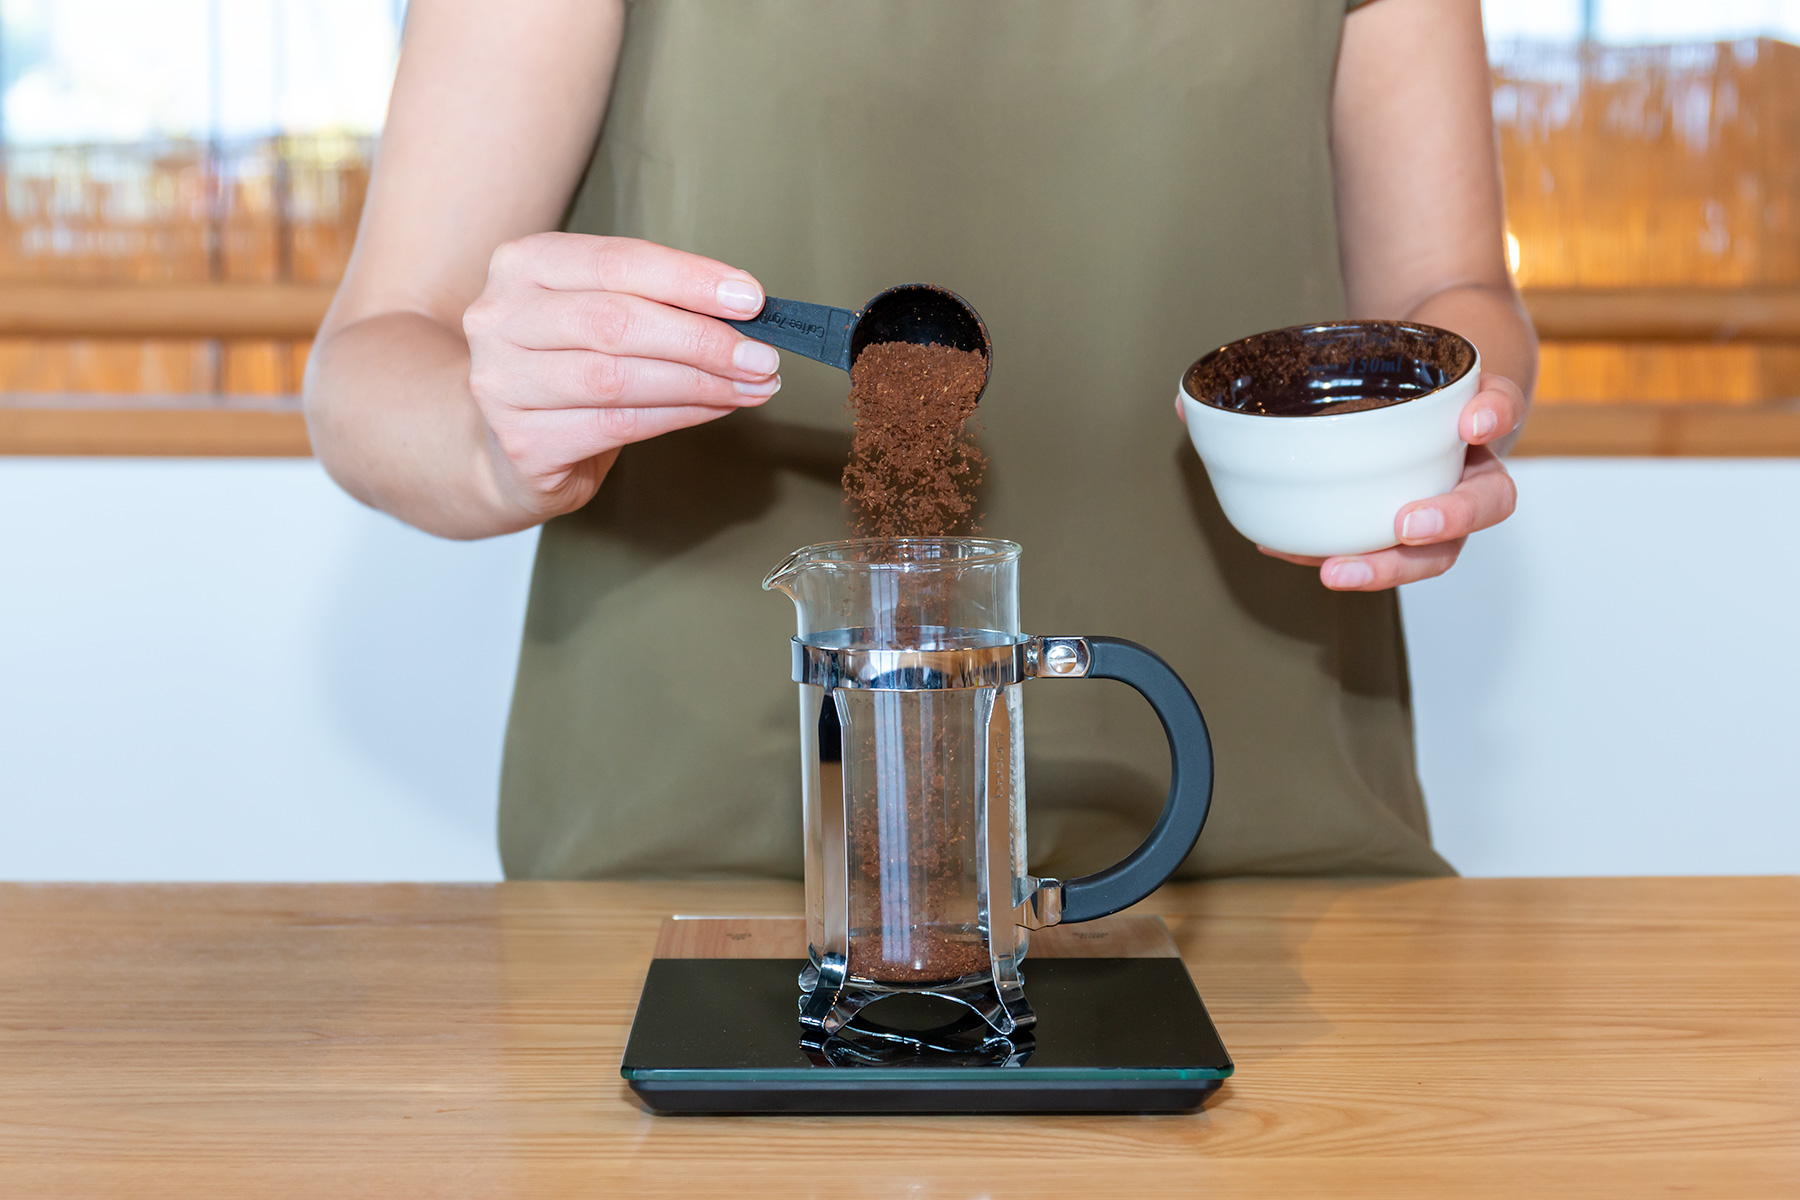 How To Make French Press Coffee: Step-by-Step Instructions